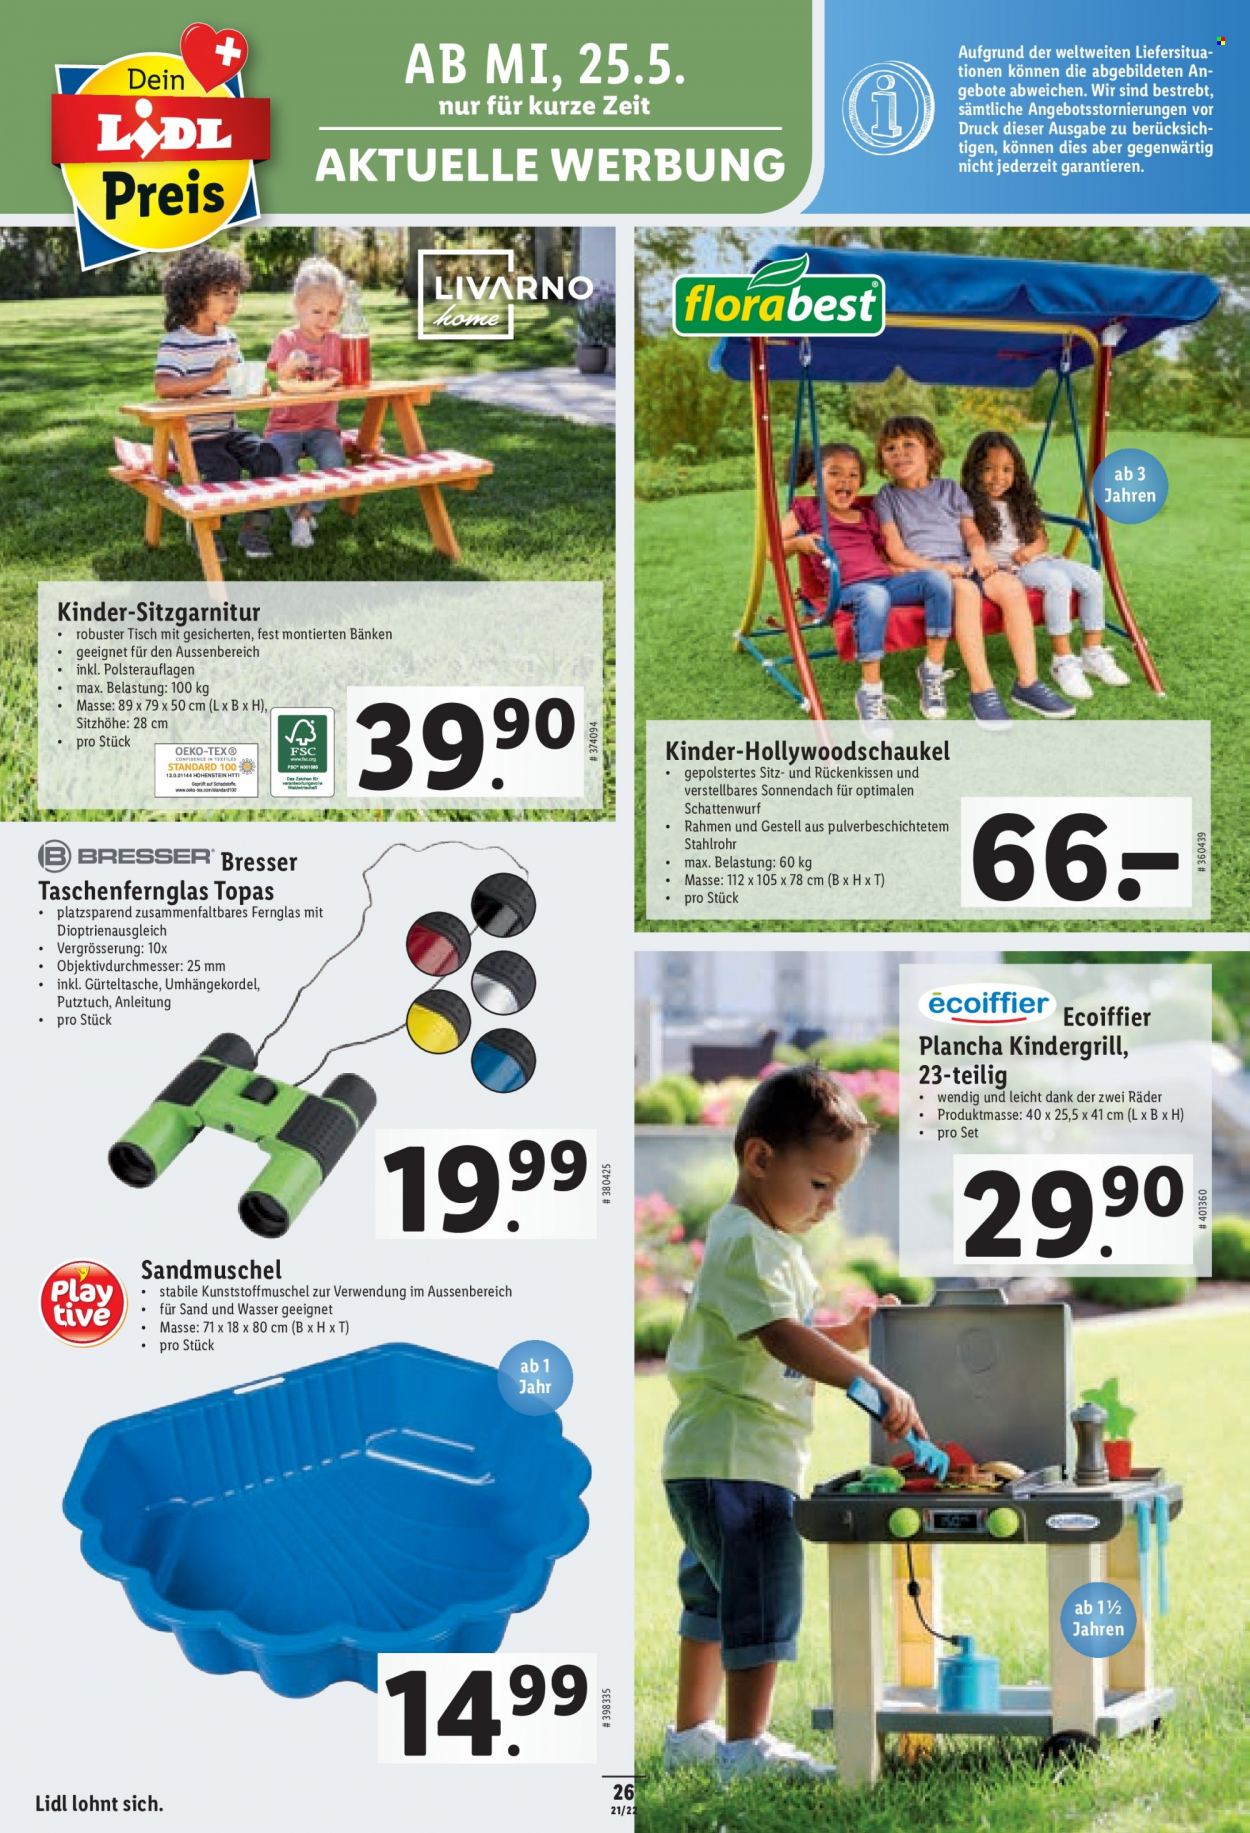 Catalogue Lidl - 25.5.2022 - 1.6.2022. Page 26.